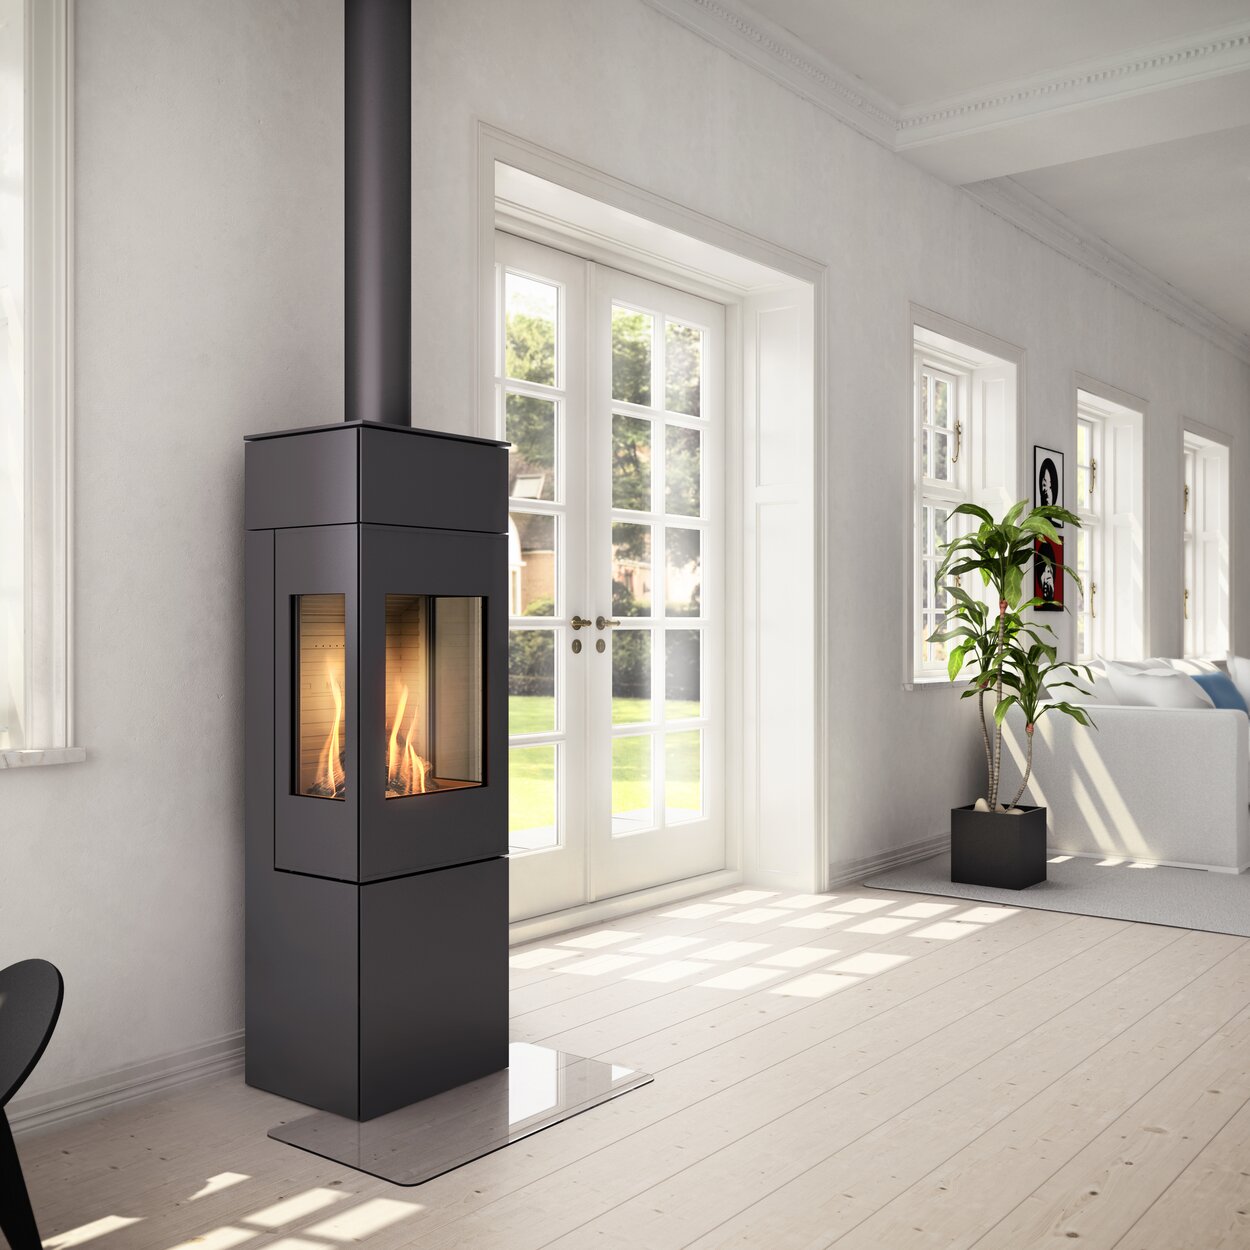 Gas stove NEXO 140 in black with steel door and two side windows in a bright living room